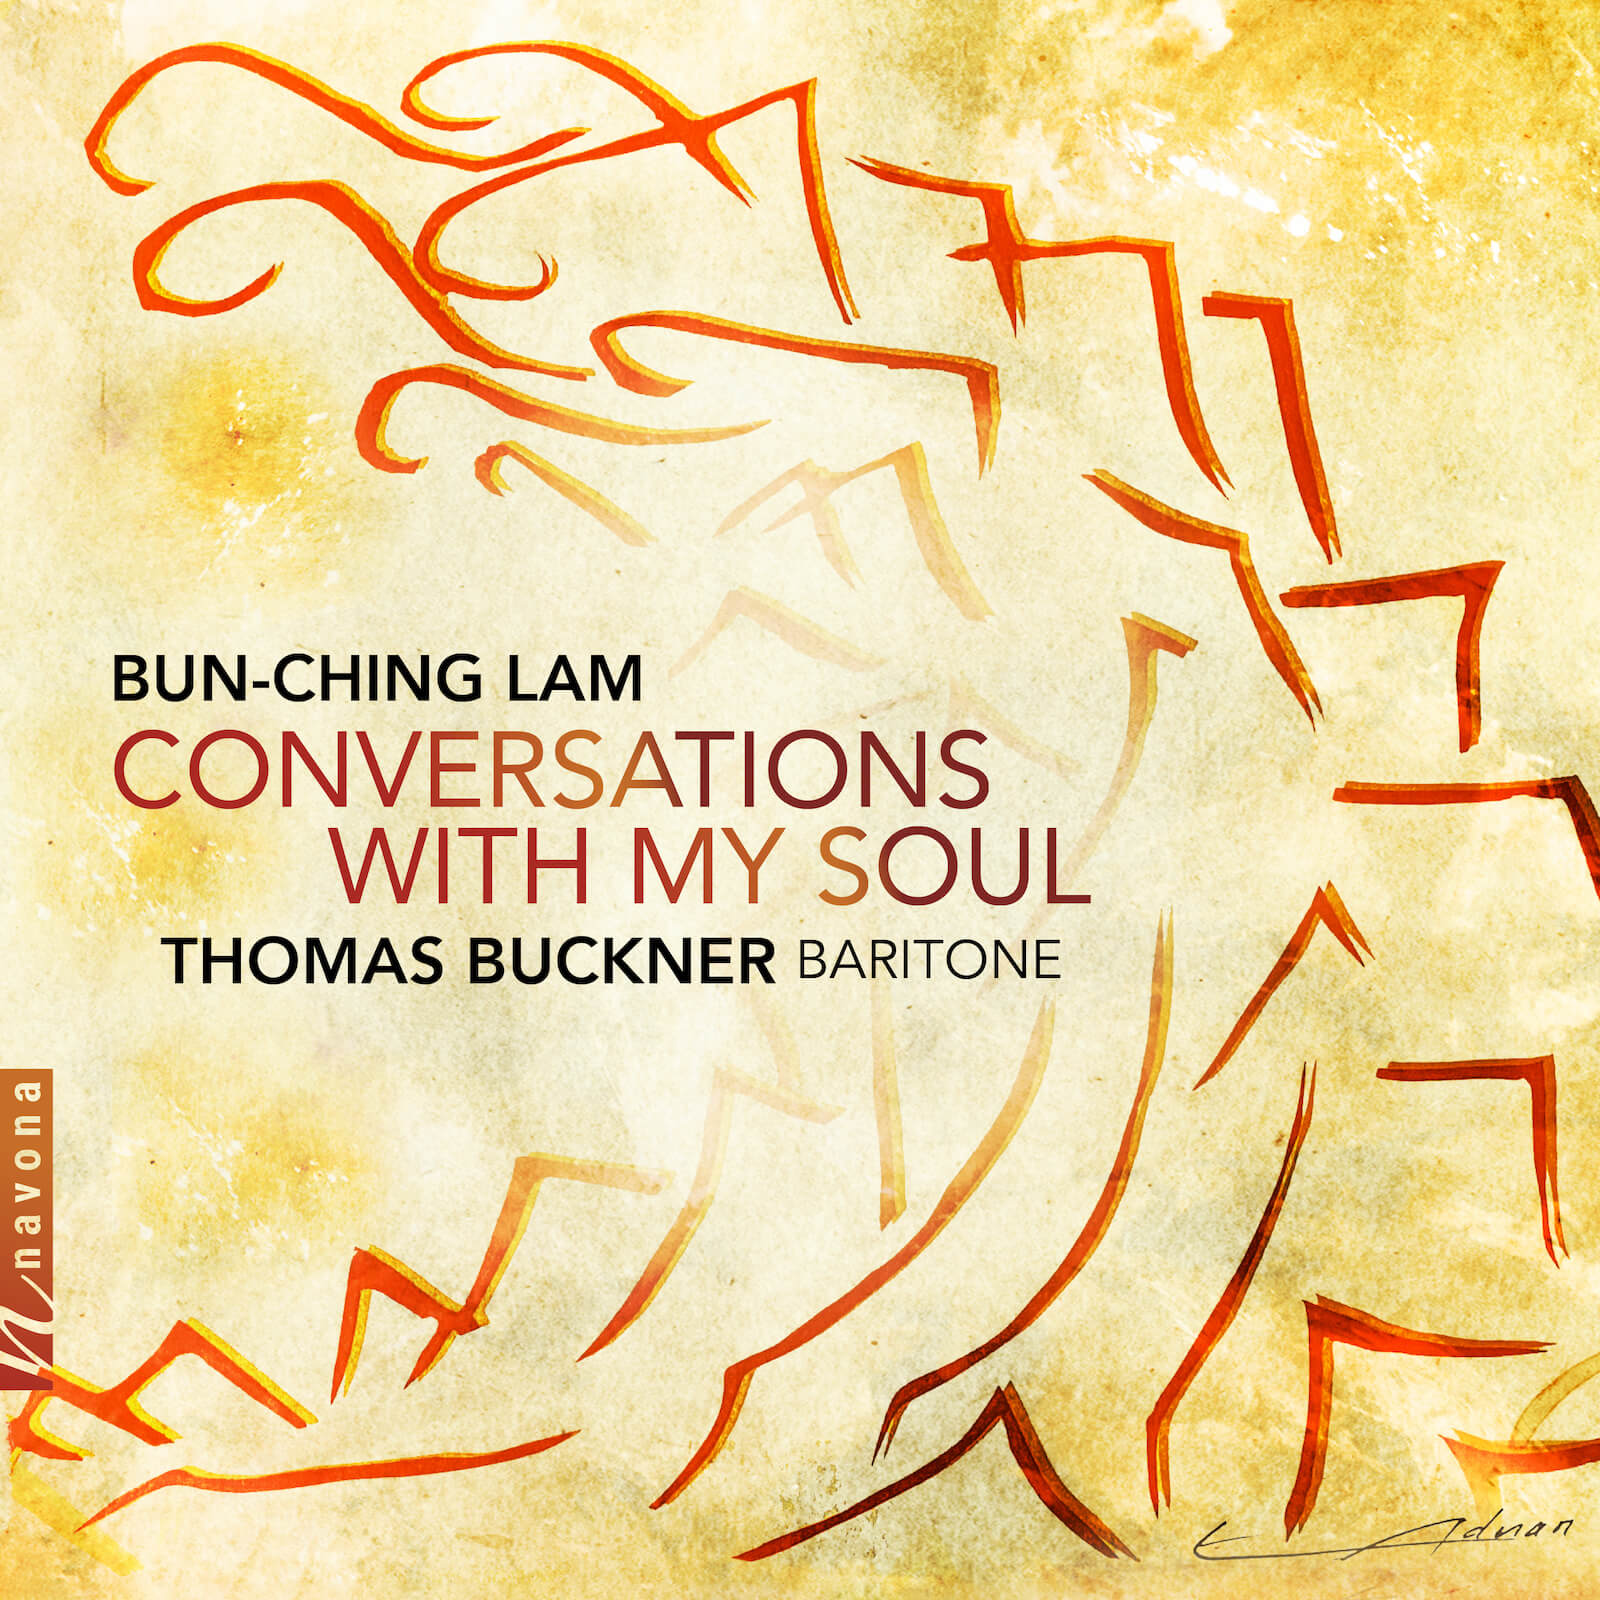 Conversations with my soul - Bun-Ching Lam - Album Cover